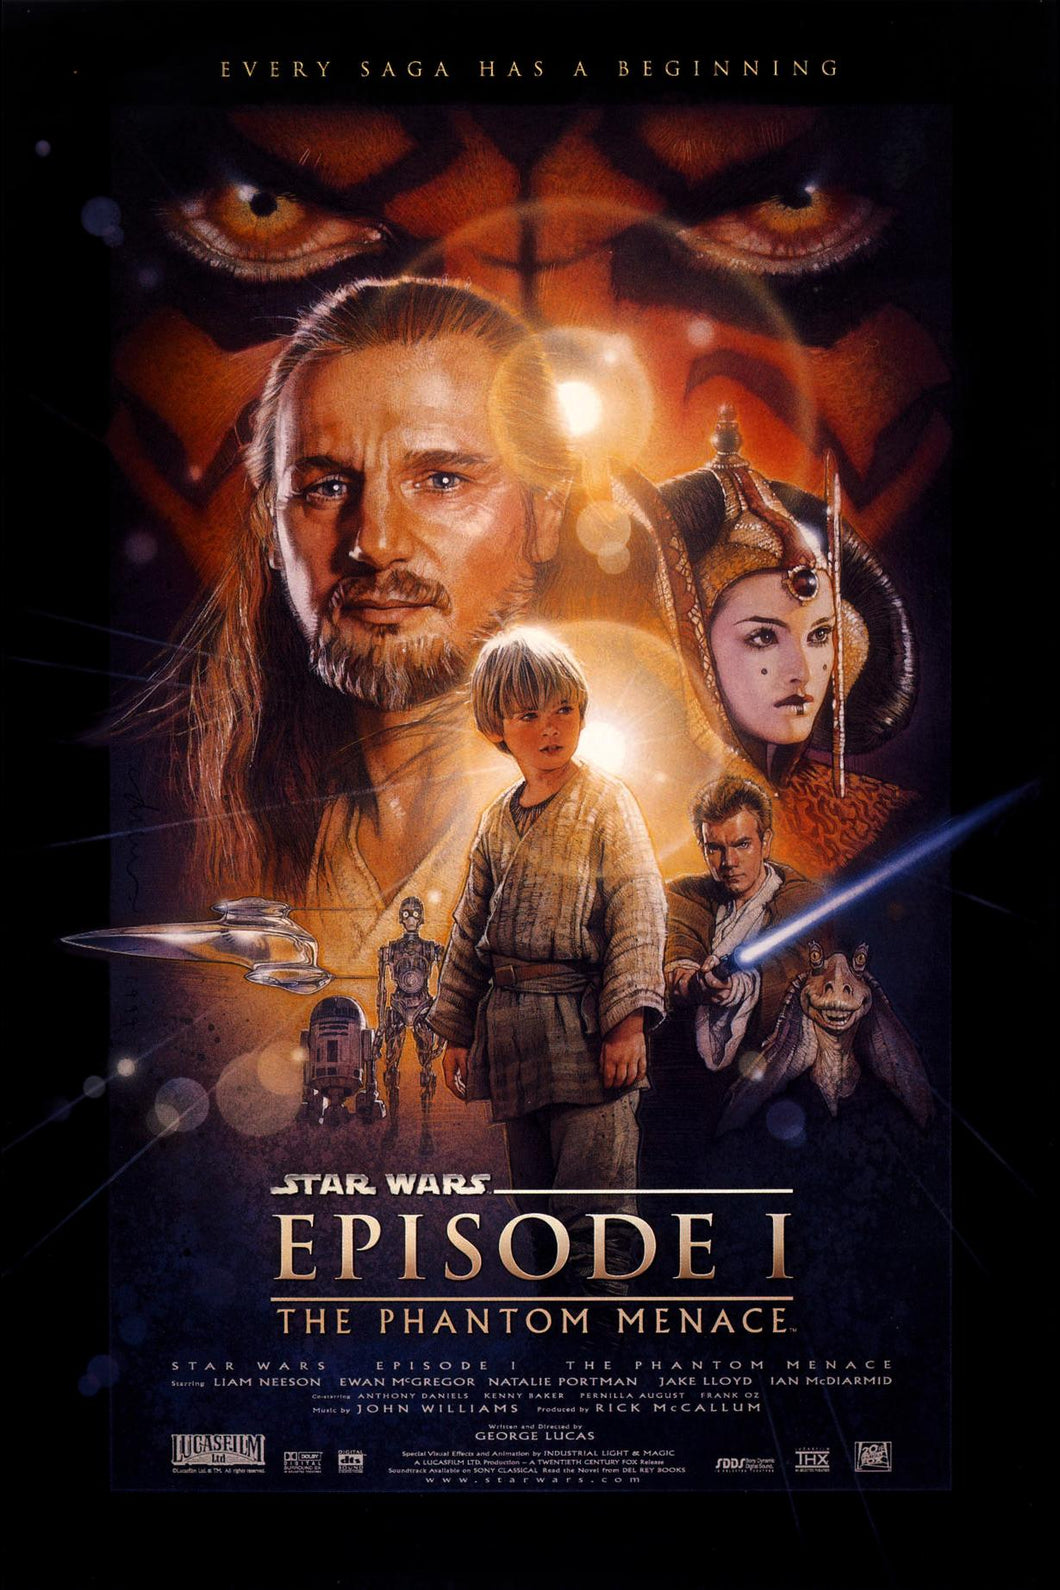 Ahmed Best signed STAR WARS Episode I: The Phantom Menace Movie Poster Photo (8x10 or 11x17)